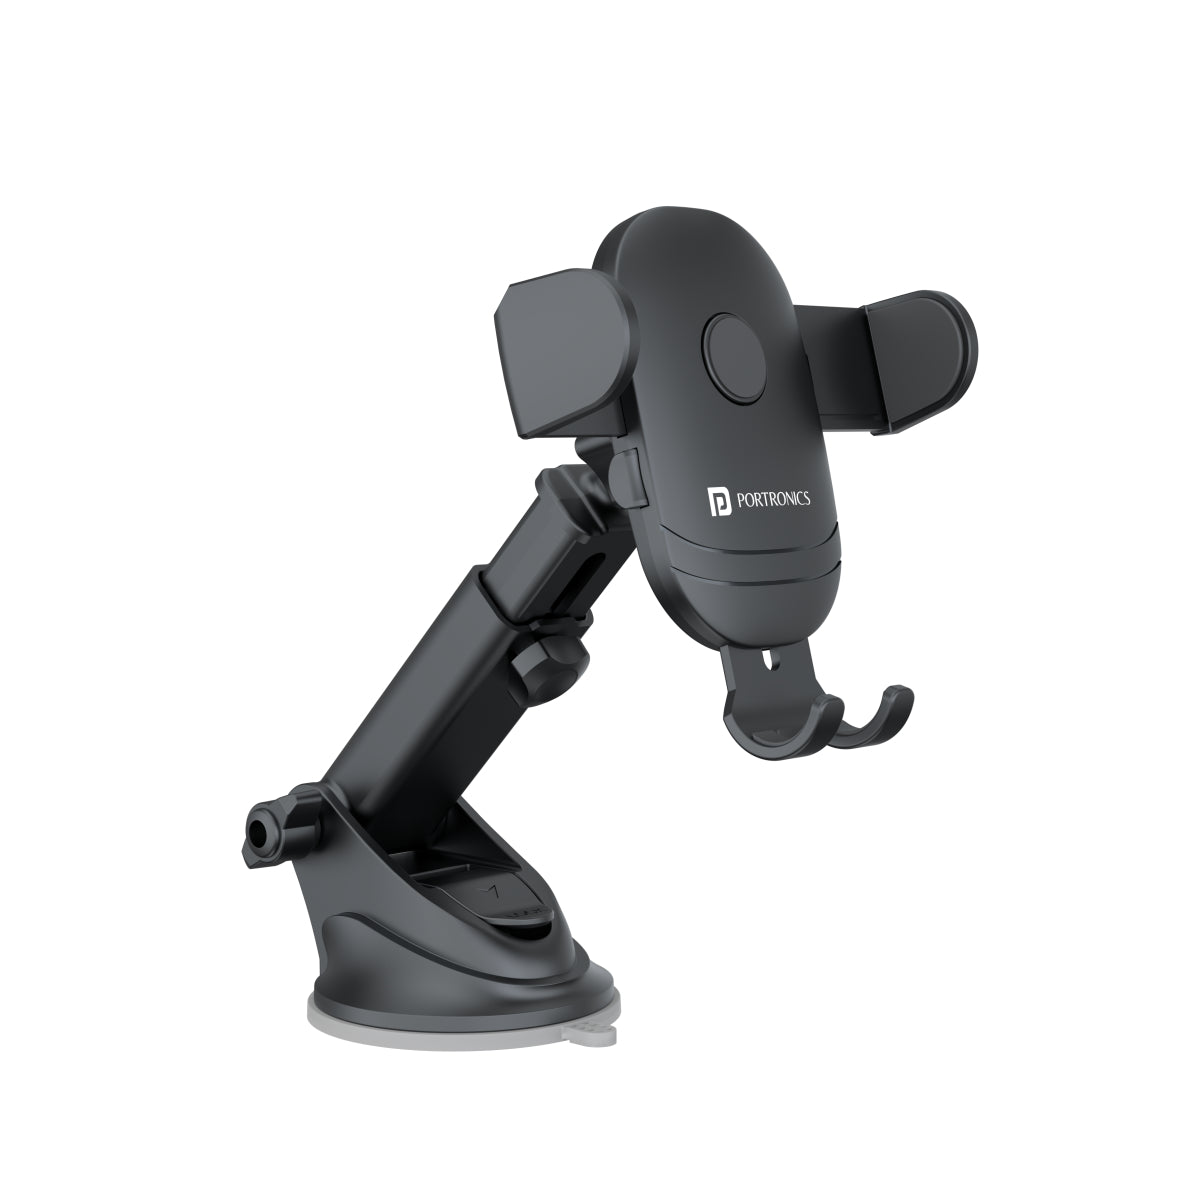 Portronics Clamp M Universal Car Mobile Holder at Discount